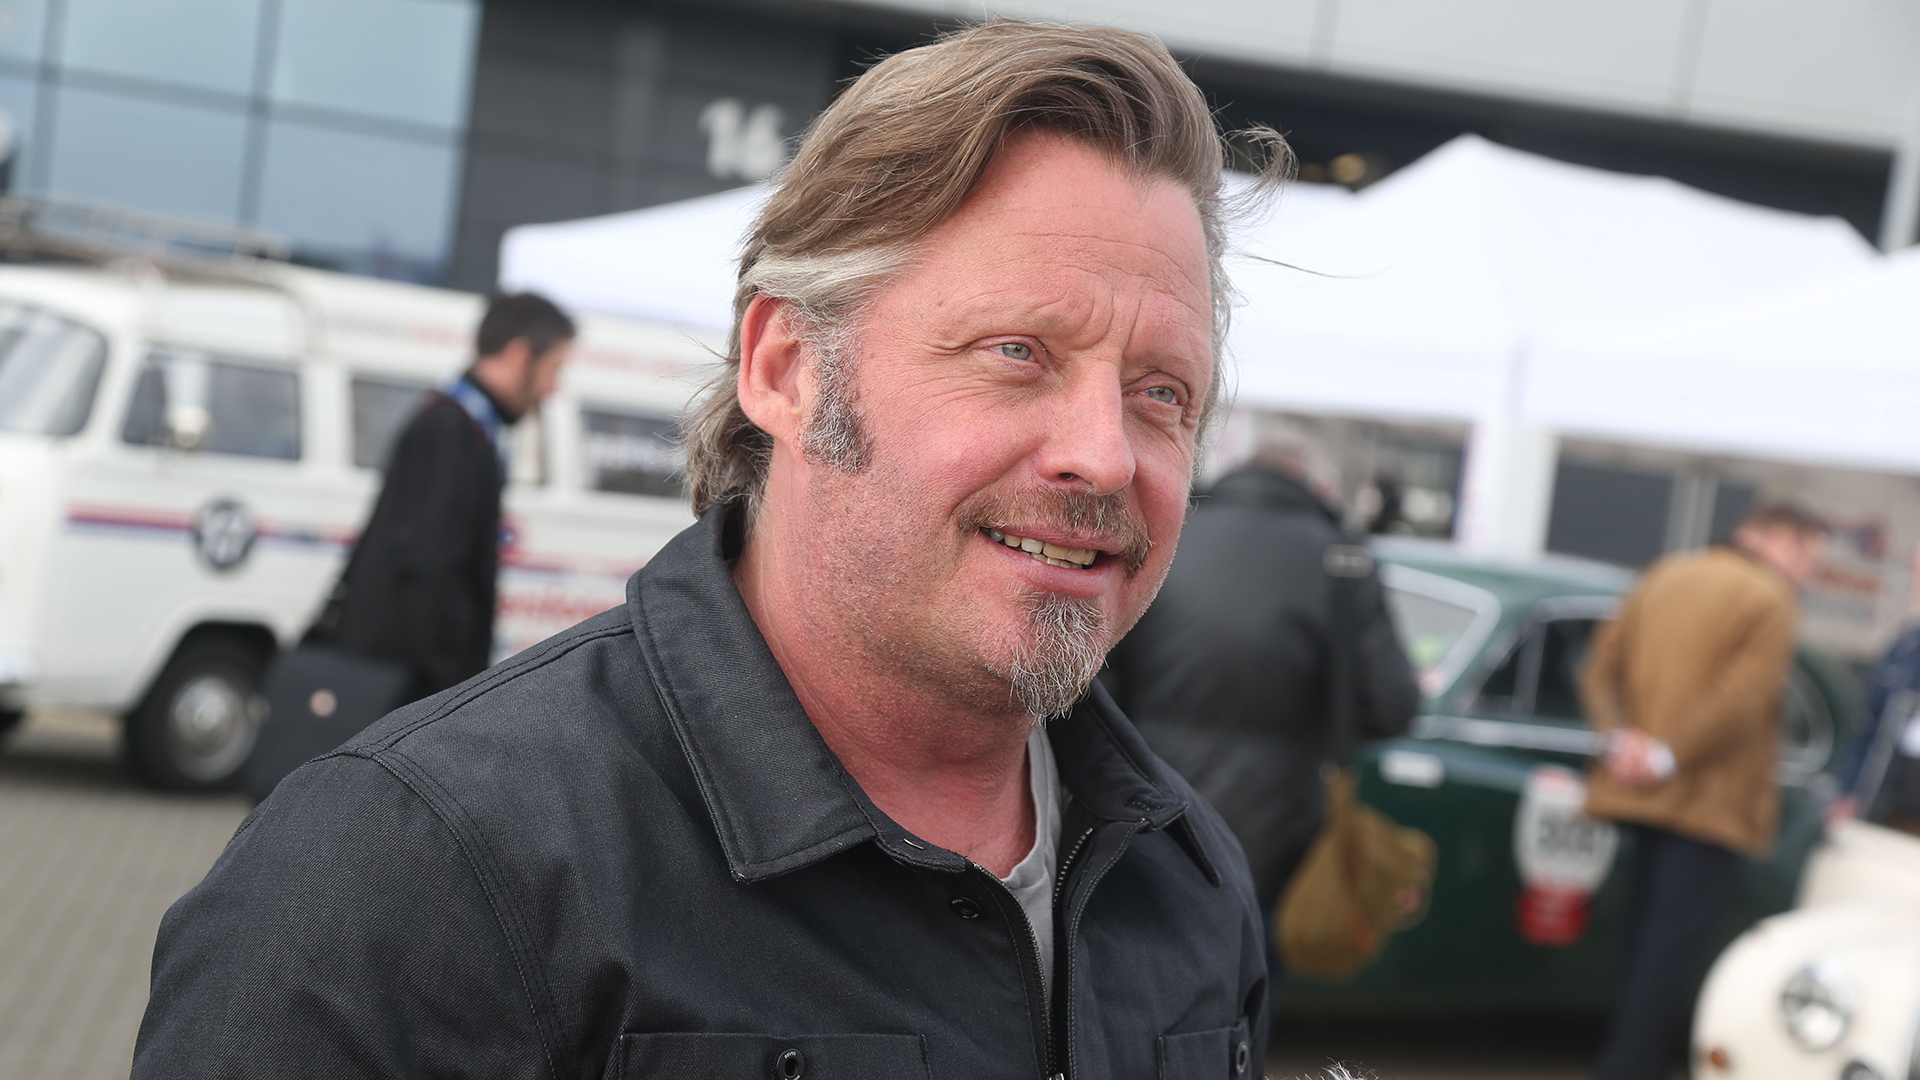 Charley Boorman interview: “All the hairy bits are the bits people want